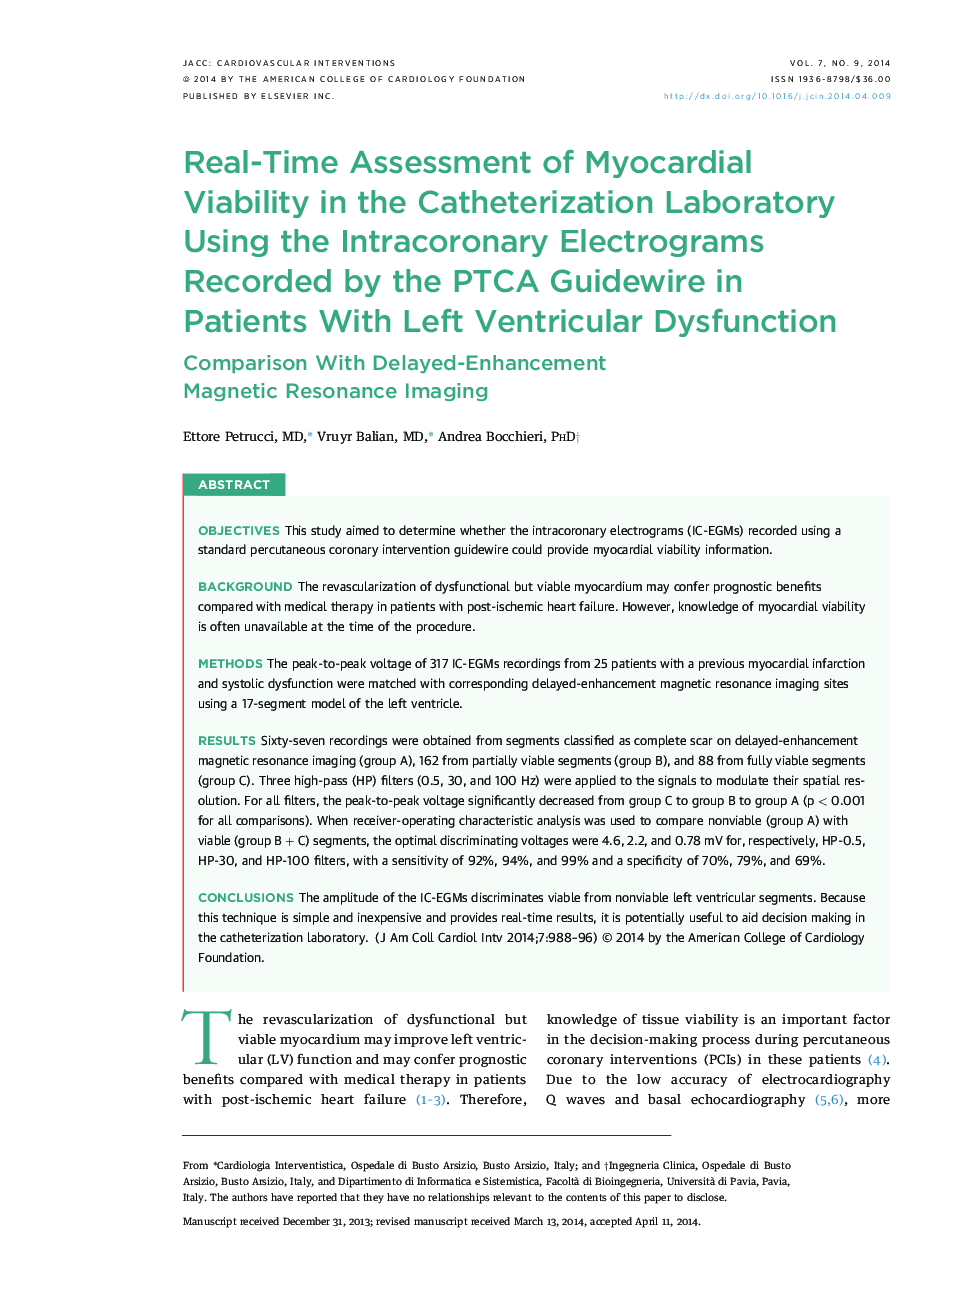 Real-Time Assessment of Myocardial Viability in the Catheterization Laboratory Using the Intracoronary Electrograms Recorded by the PTCA Guidewire in Patients With Left Ventricular Dysfunction : Comparison With Delayed-Enhancement Magnetic Resonance Imagi